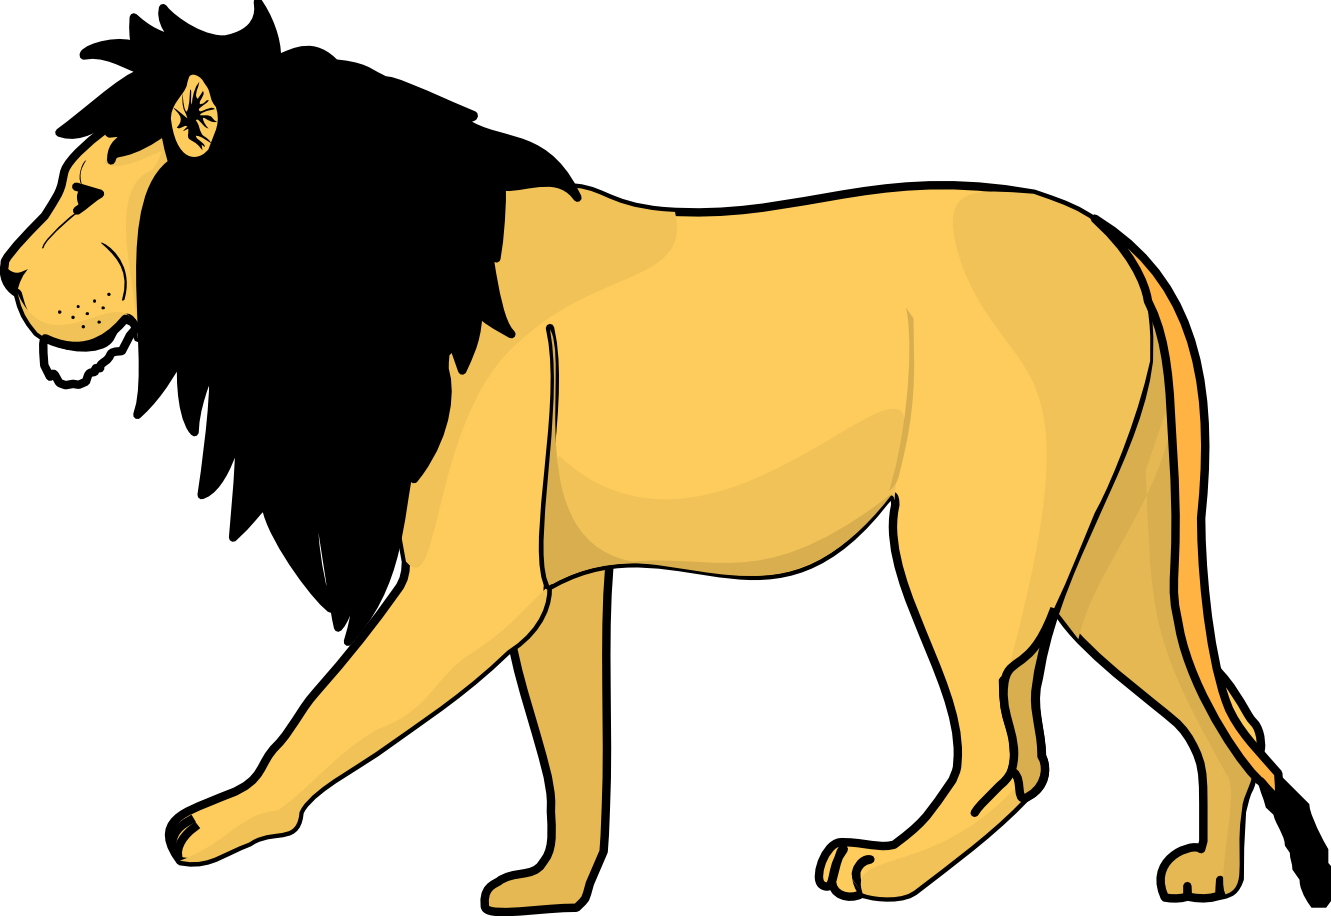 Lion PNG image, free image download, picture, lions